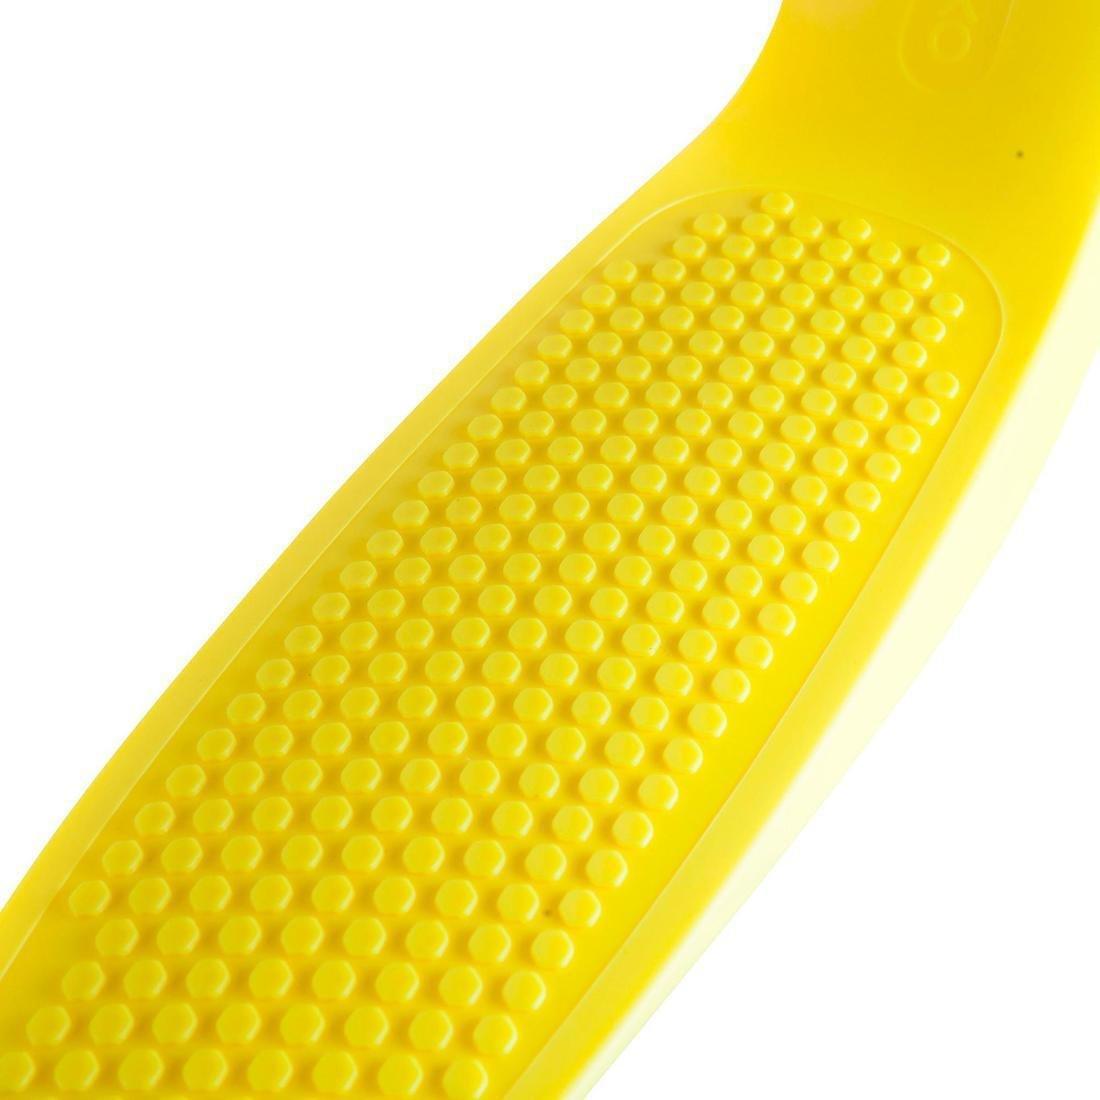 OXELO - B1 Scooter Shell, Yellow